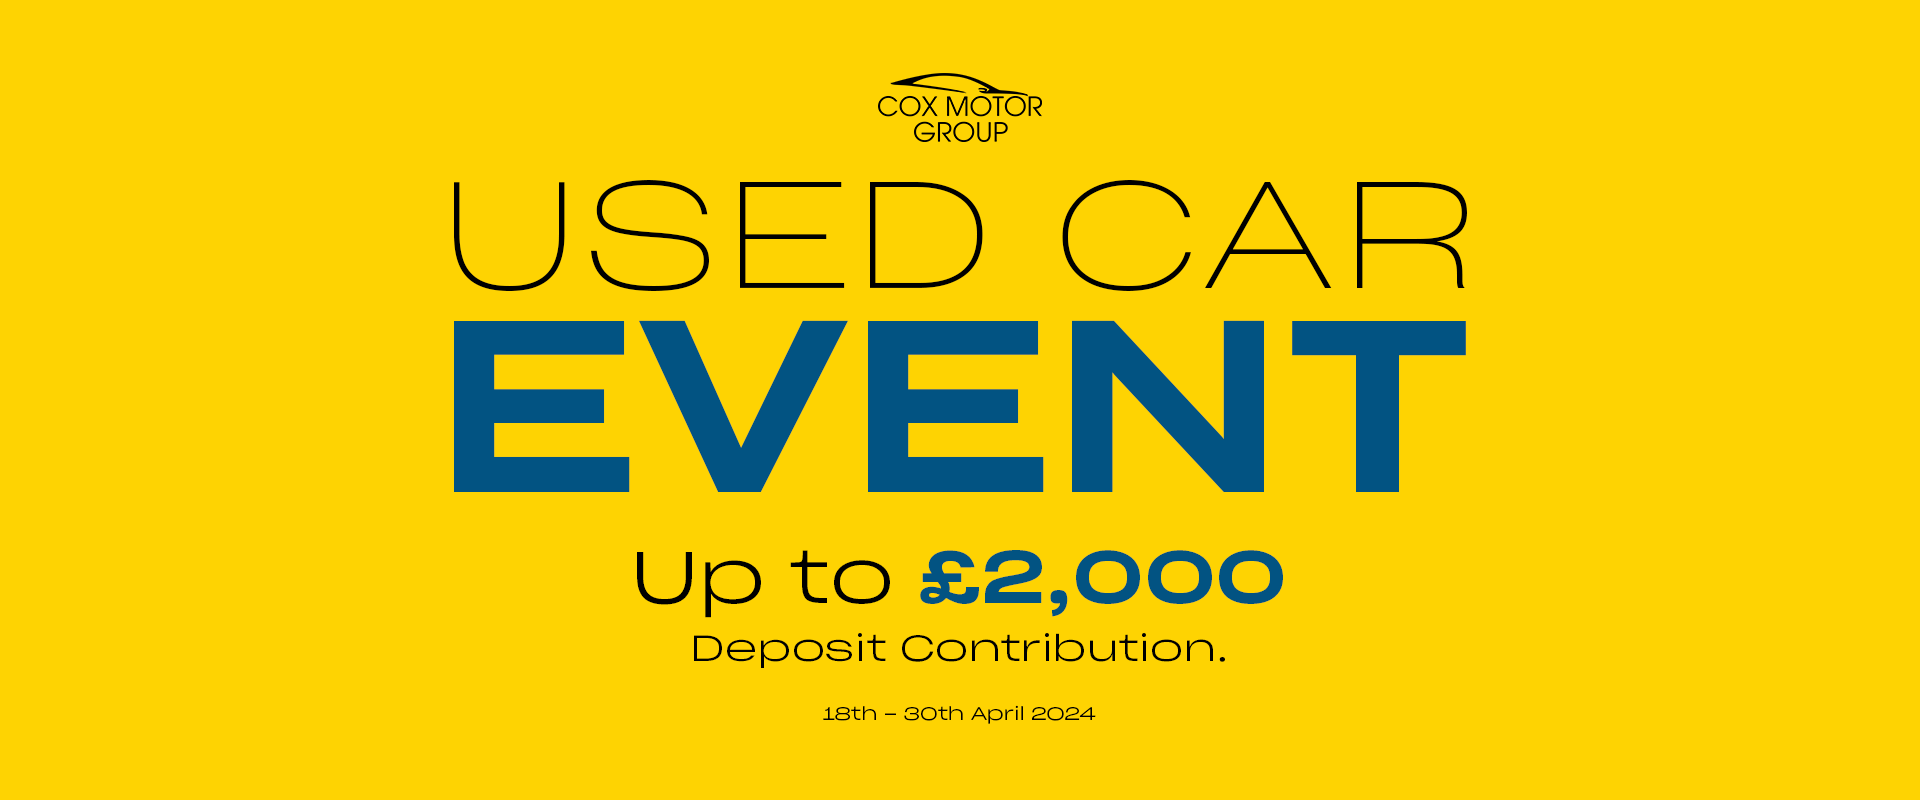 Used Car Event